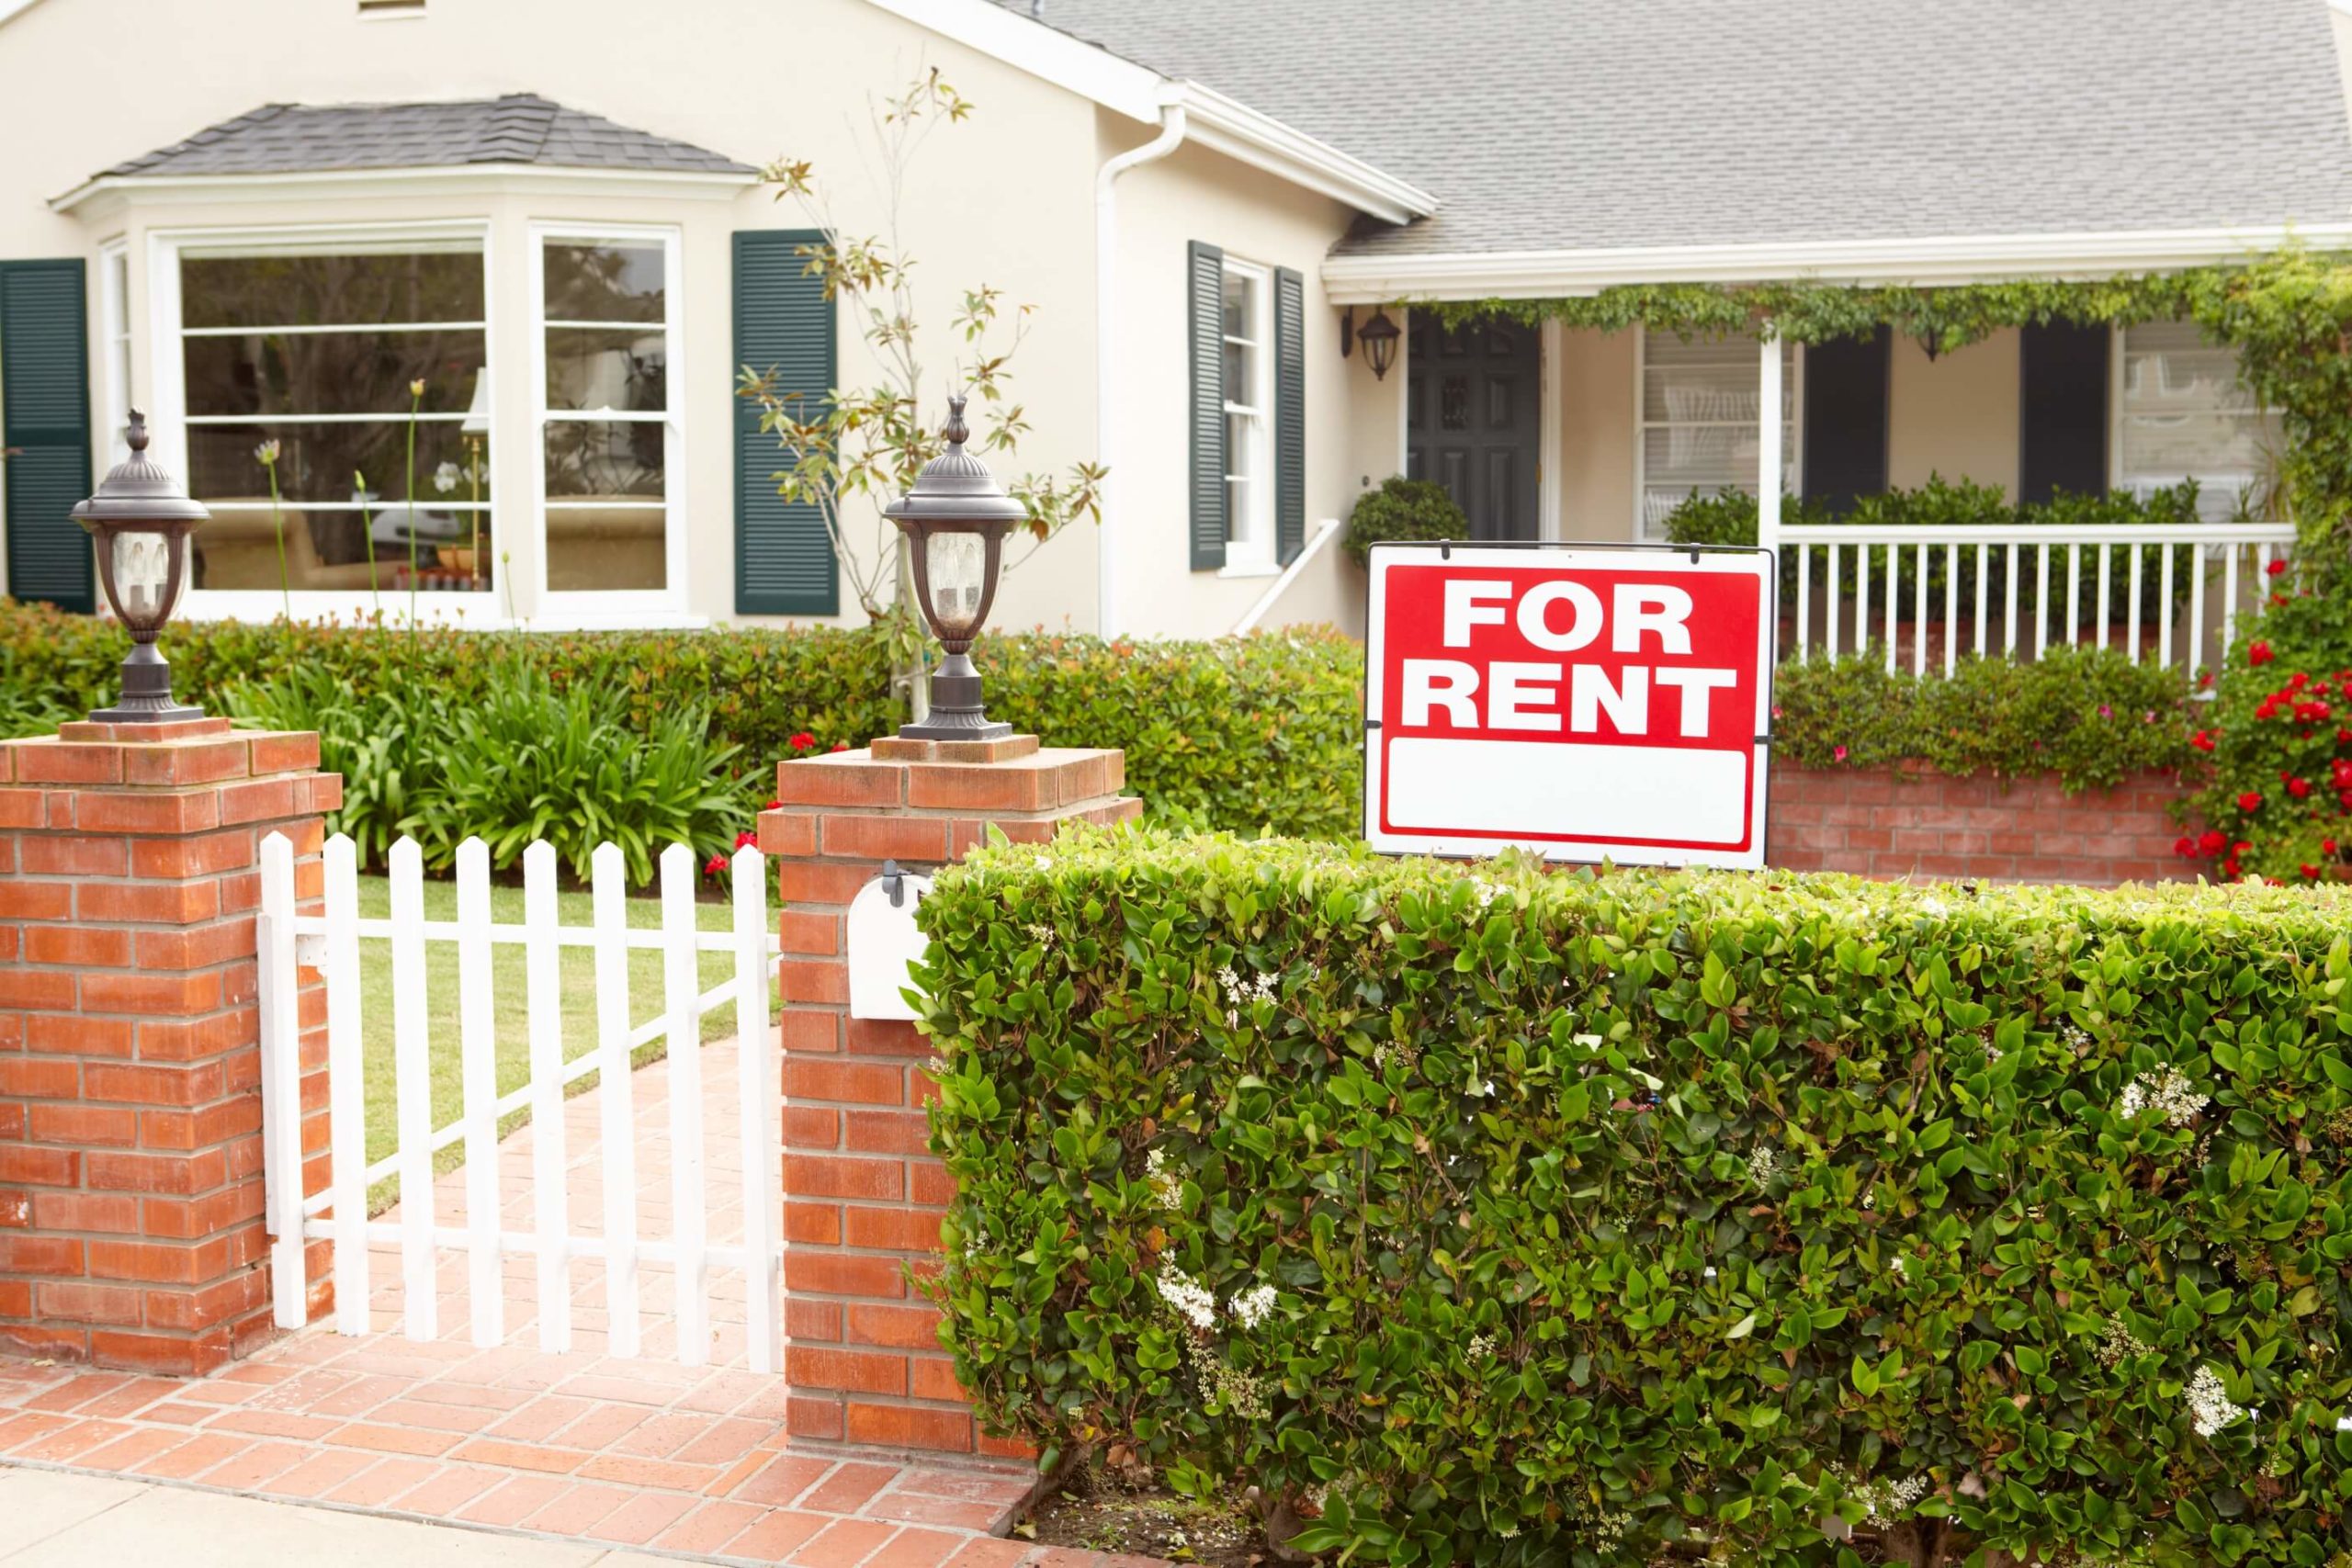 Sell Rental Property for Cash